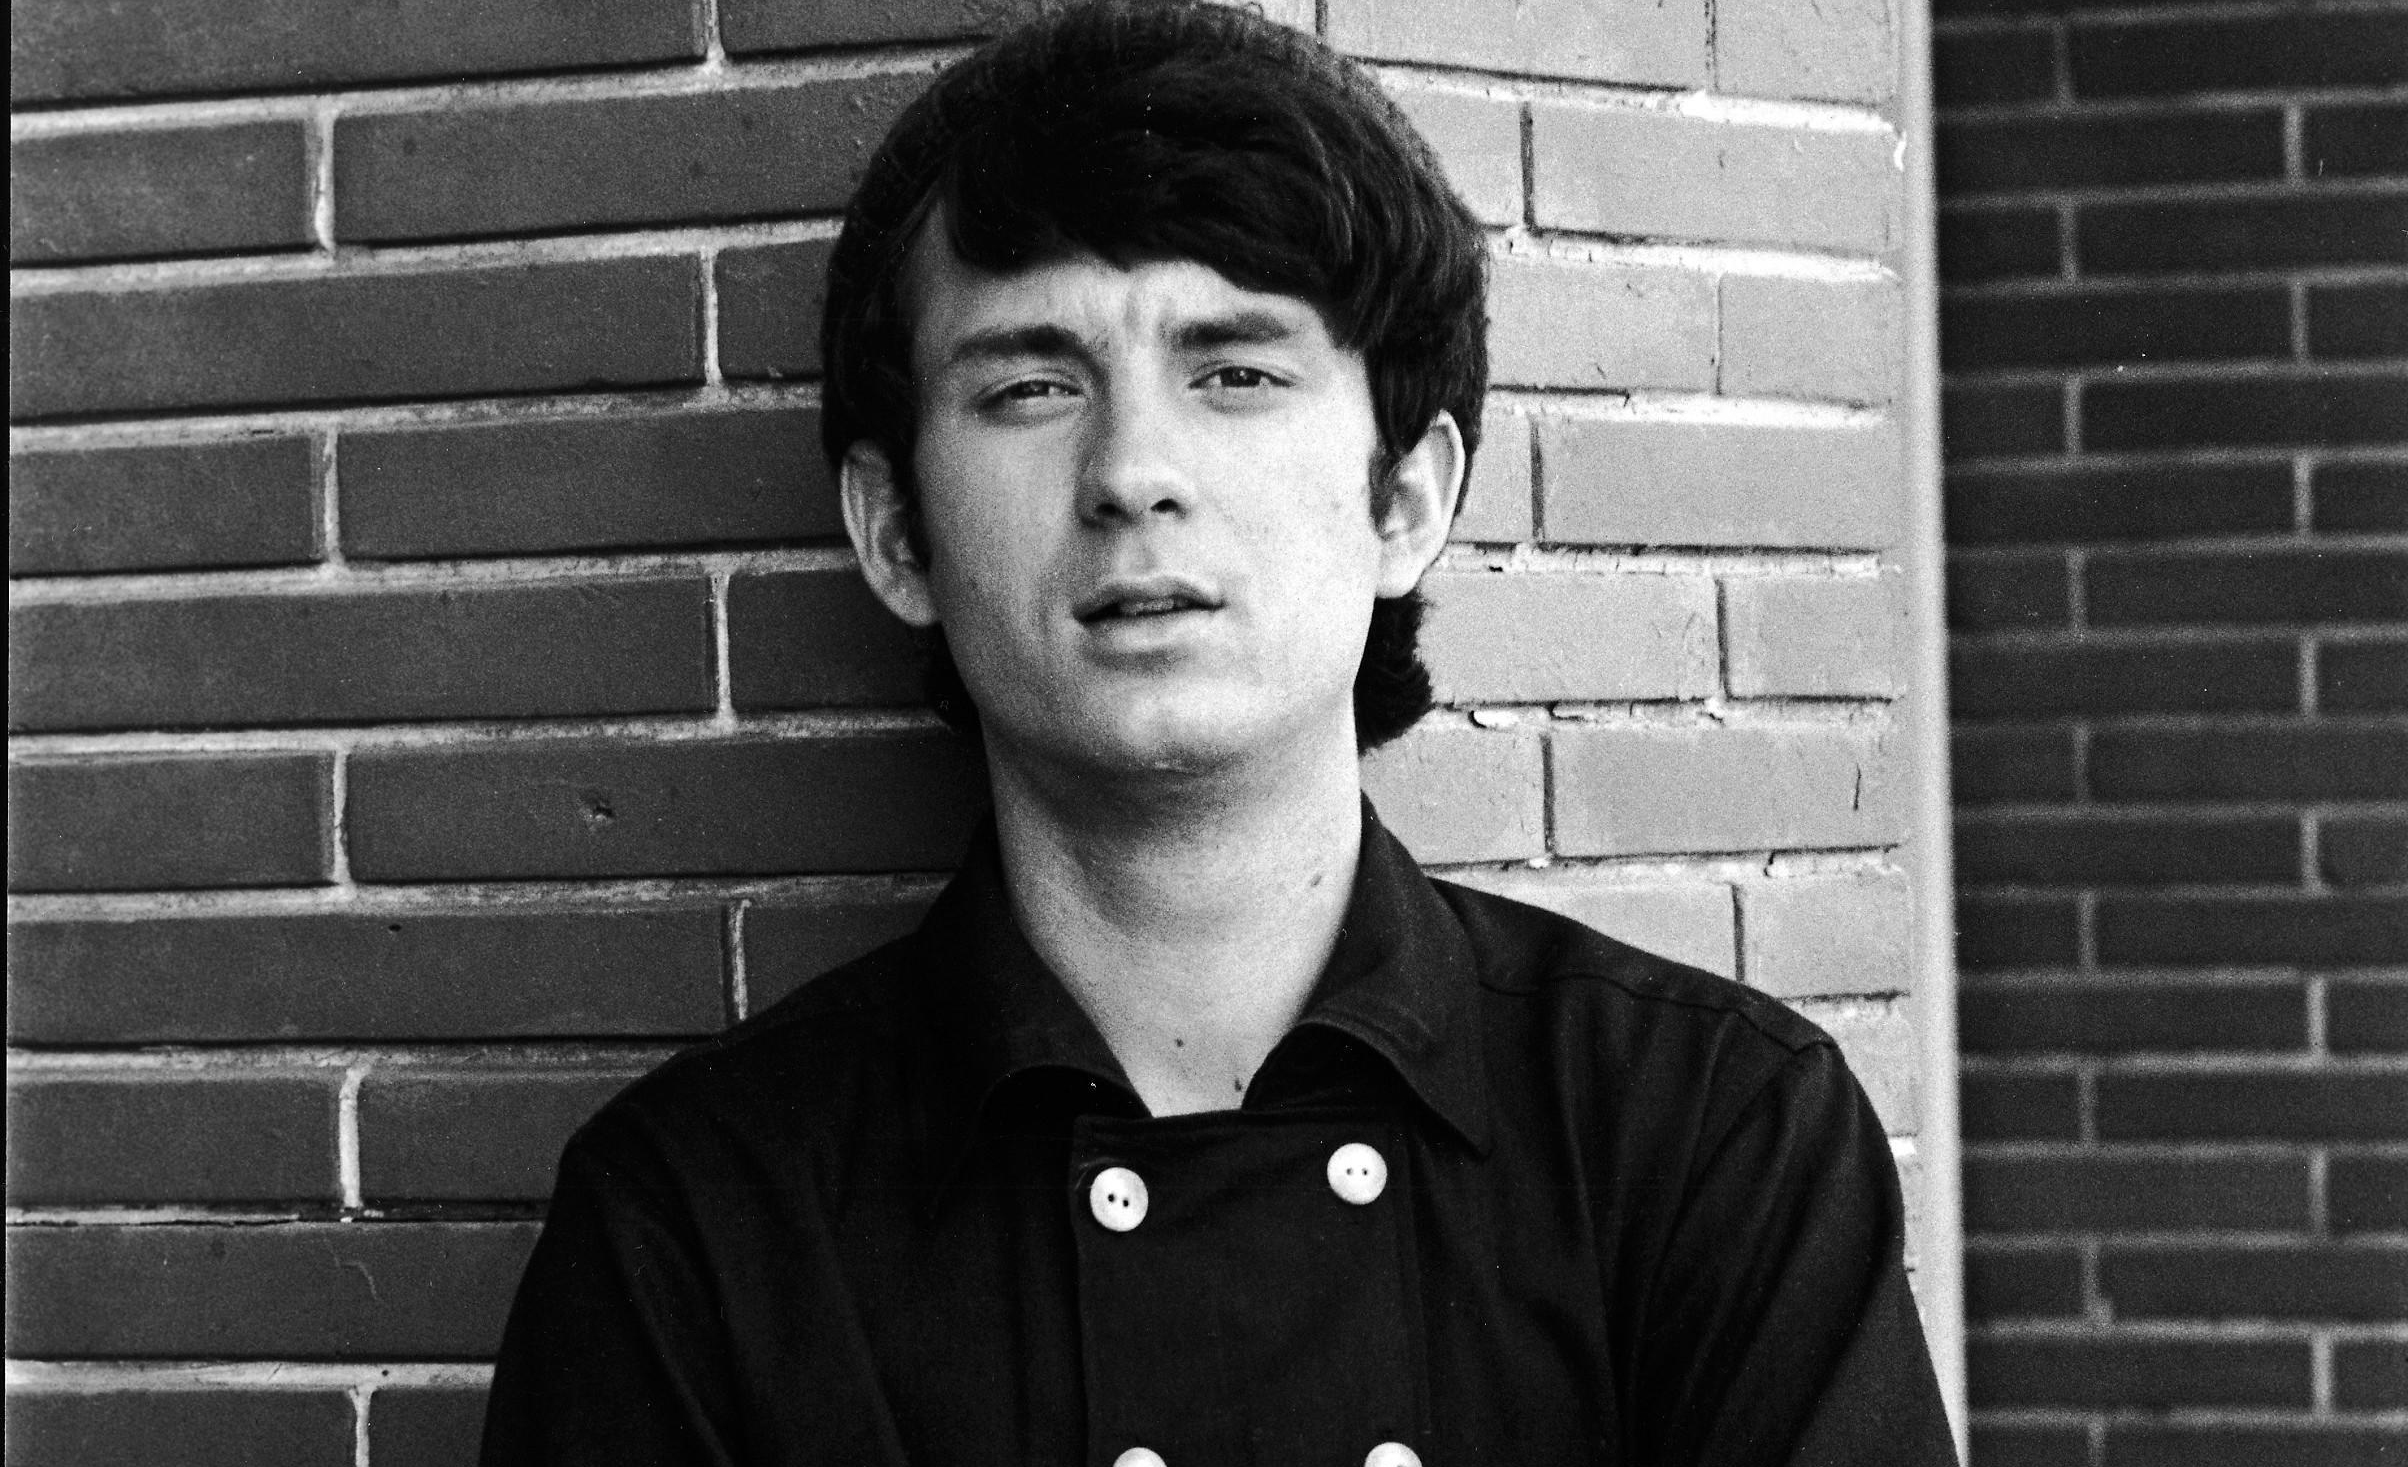 Nesmith from the Monkees has died aged